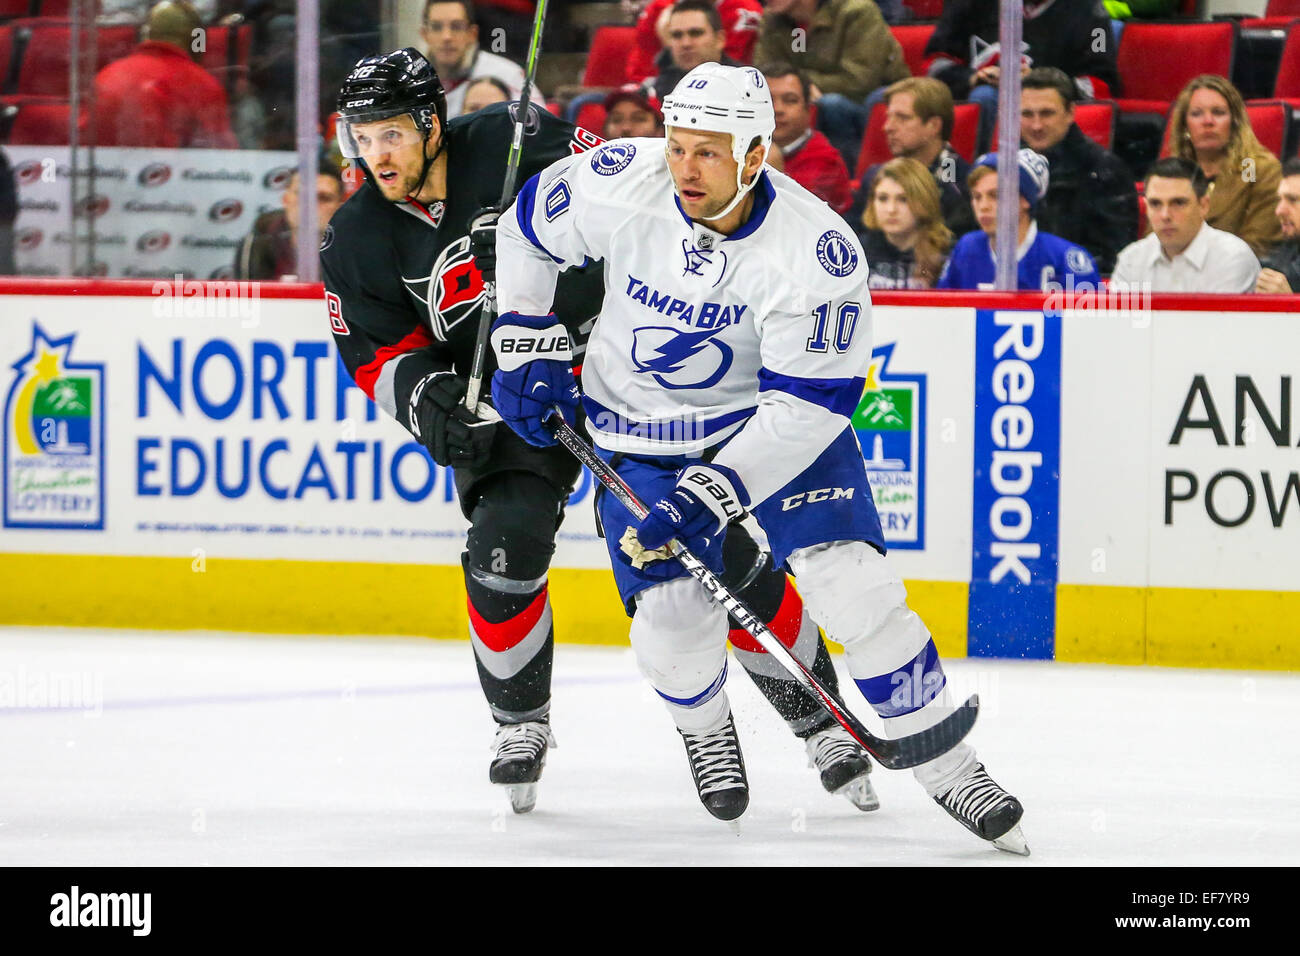 Raleigh, North Carolina, USA. 27th Jan, 2015. Tampa Bay Lightning left wing Brenden Morrow (10) and Carolina Hurricanes center Jay McClement (18) during the NHL game between the Tampa Bay Lightning and the Carolina Hurricanes at the PNC Arena.  The Carolina Hurricanes defeated the Tampa Bay Lightning 4-2. Credit:  Andy Martin Jr/Alamy Live News Stock Photo